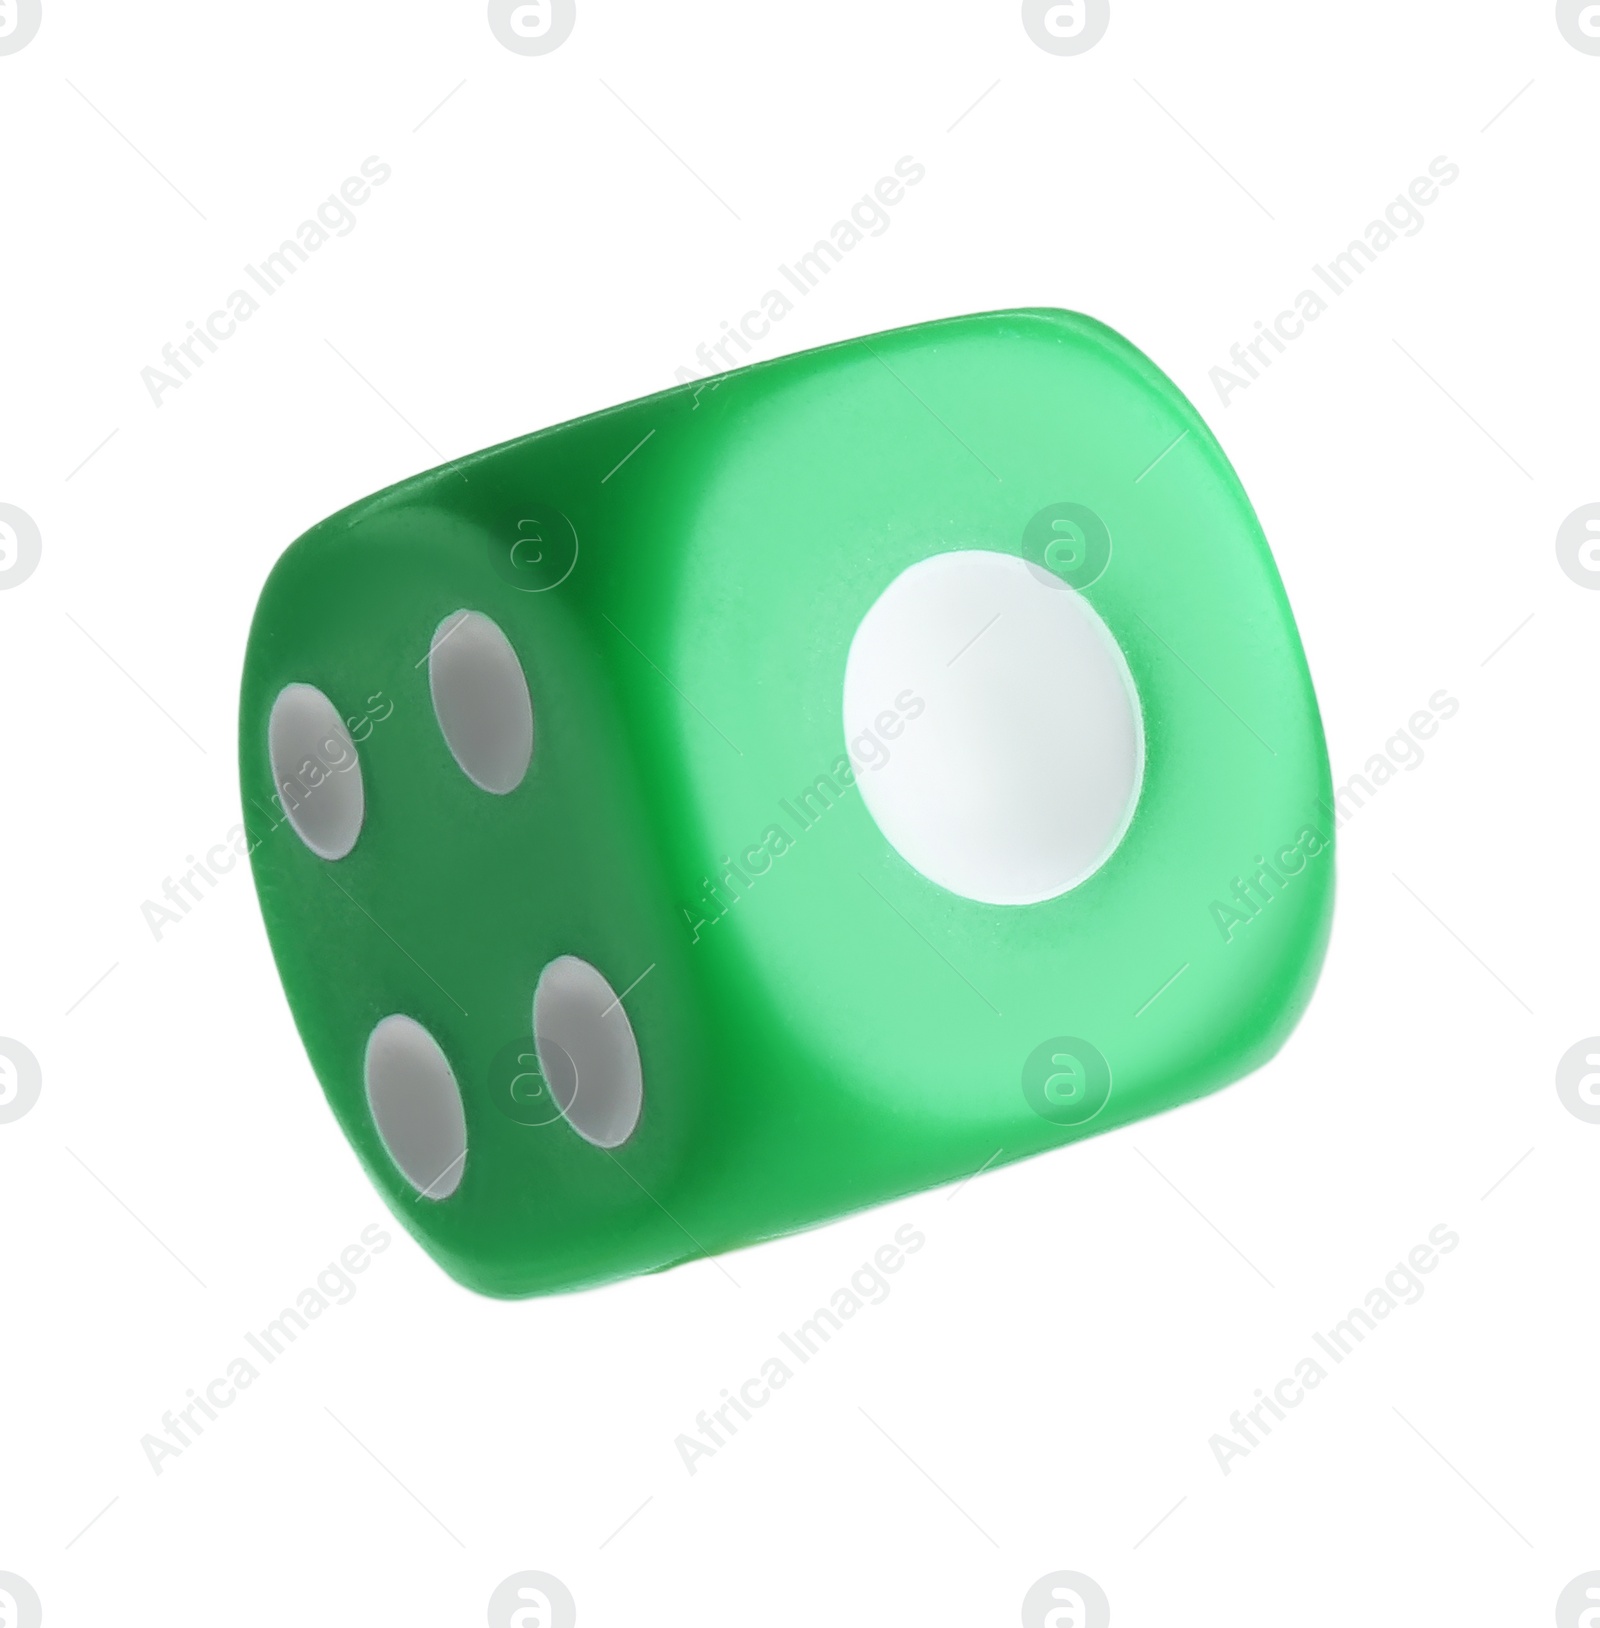 Photo of One green game dice isolated on white